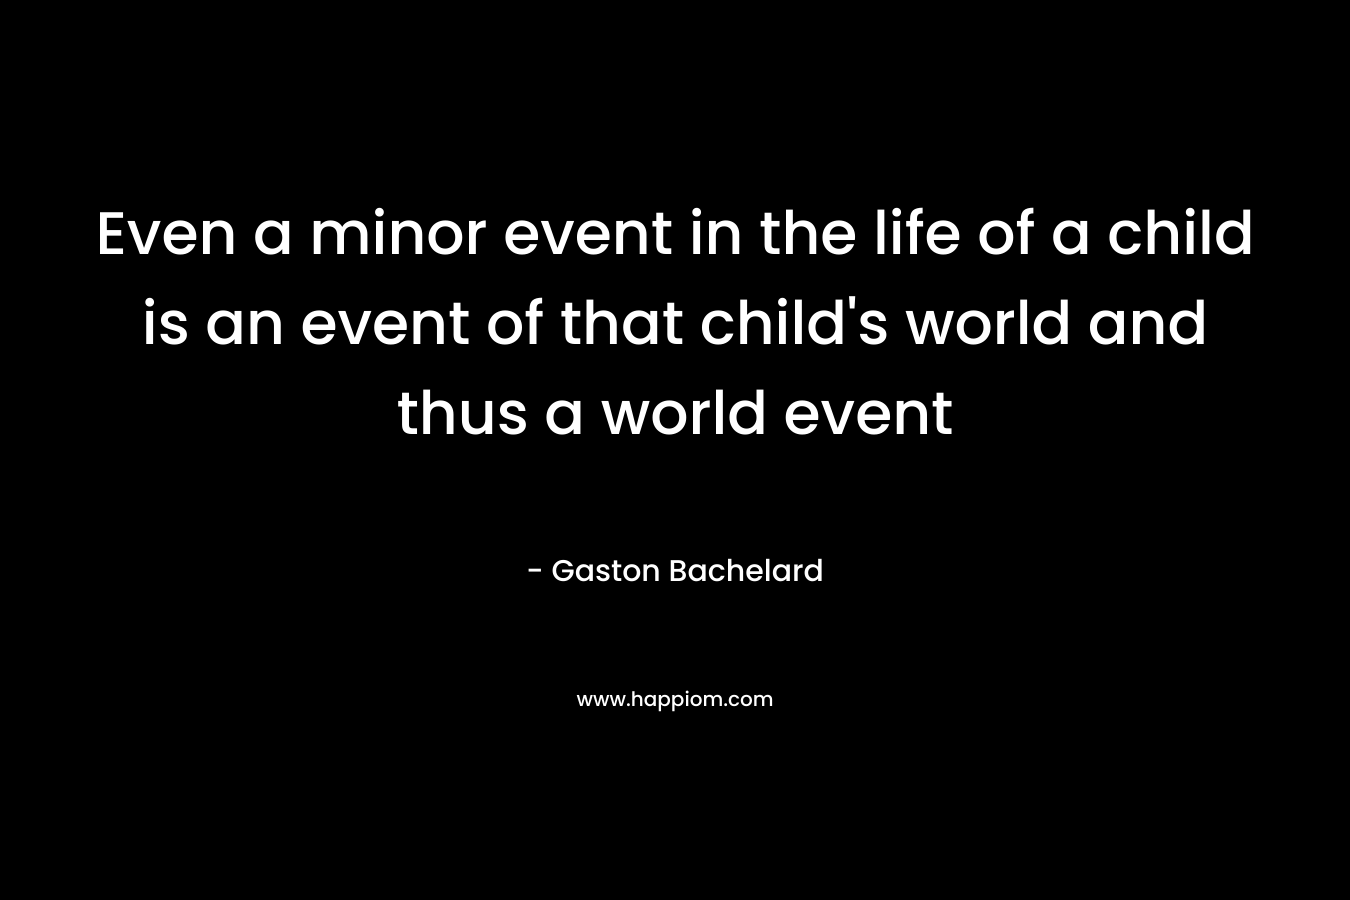 Even a minor event in the life of a child is an event of that child’s world and thus a world event – Gaston Bachelard